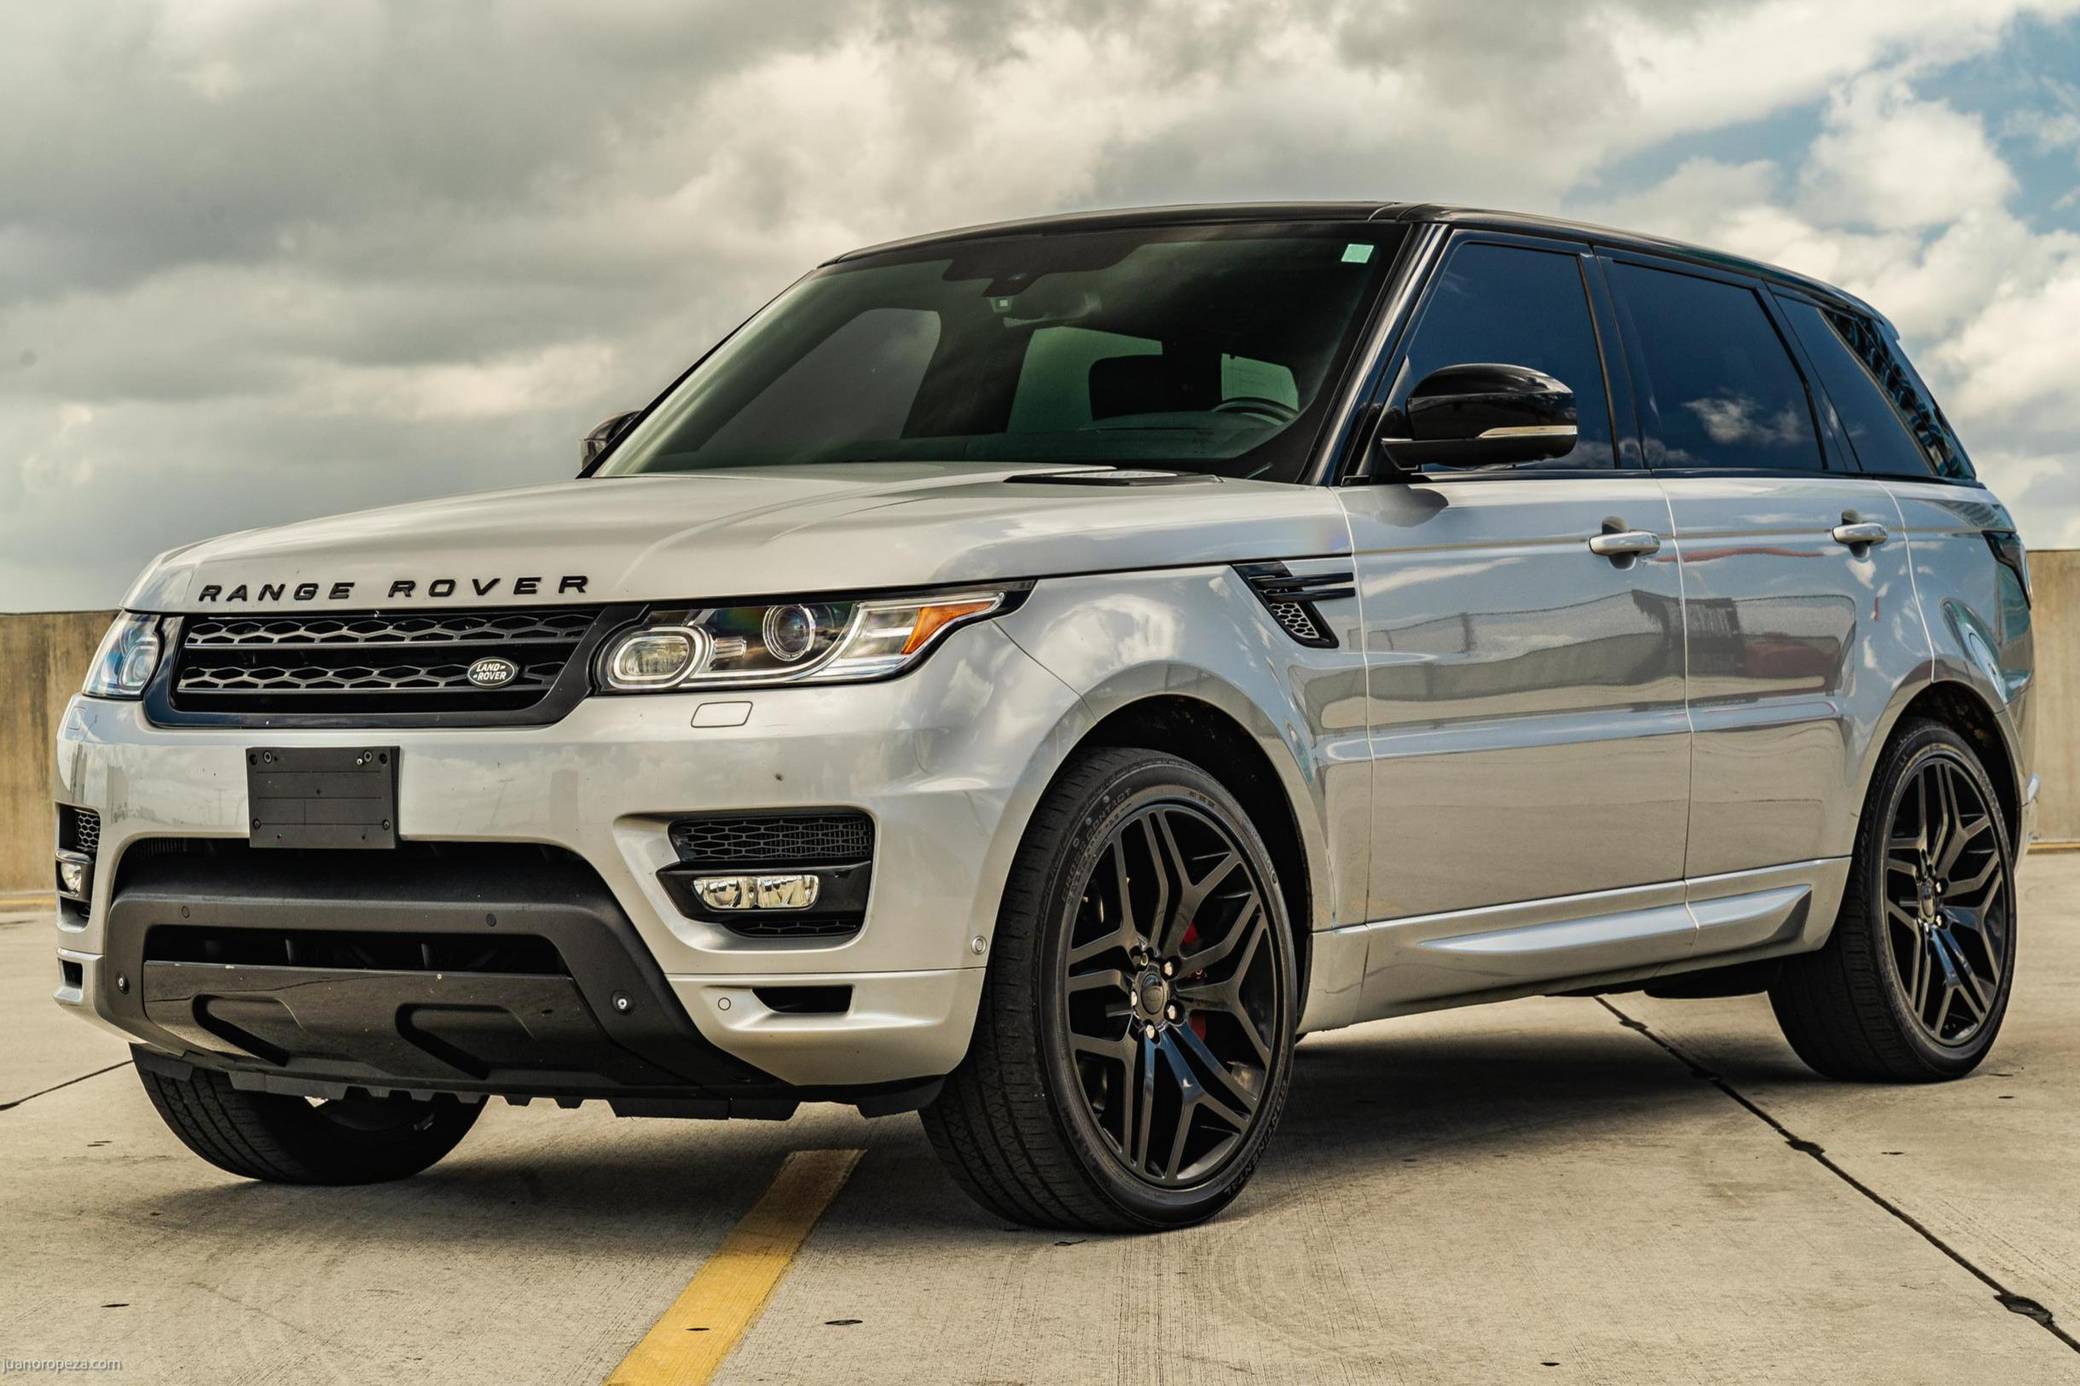 2014 Range Rover Sport Autobiography for Sale - Cars Bids